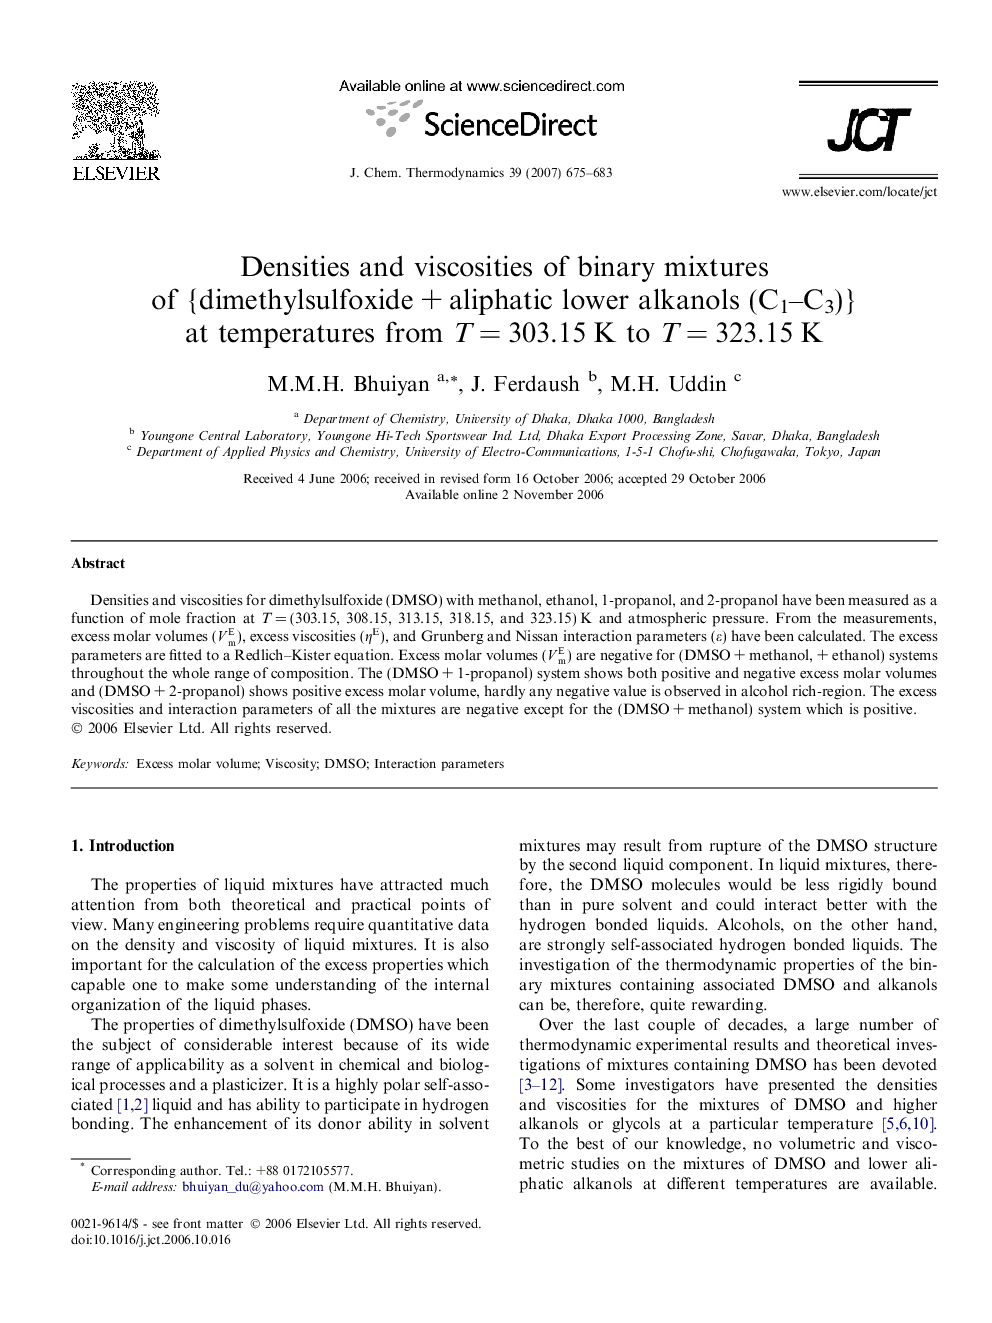 Densities and viscosities of binary mixtures of {dimethylsulfoxide + aliphatic lower alkanols (C1–C3)} at temperatures from T = 303.15 K to T = 323.15 K